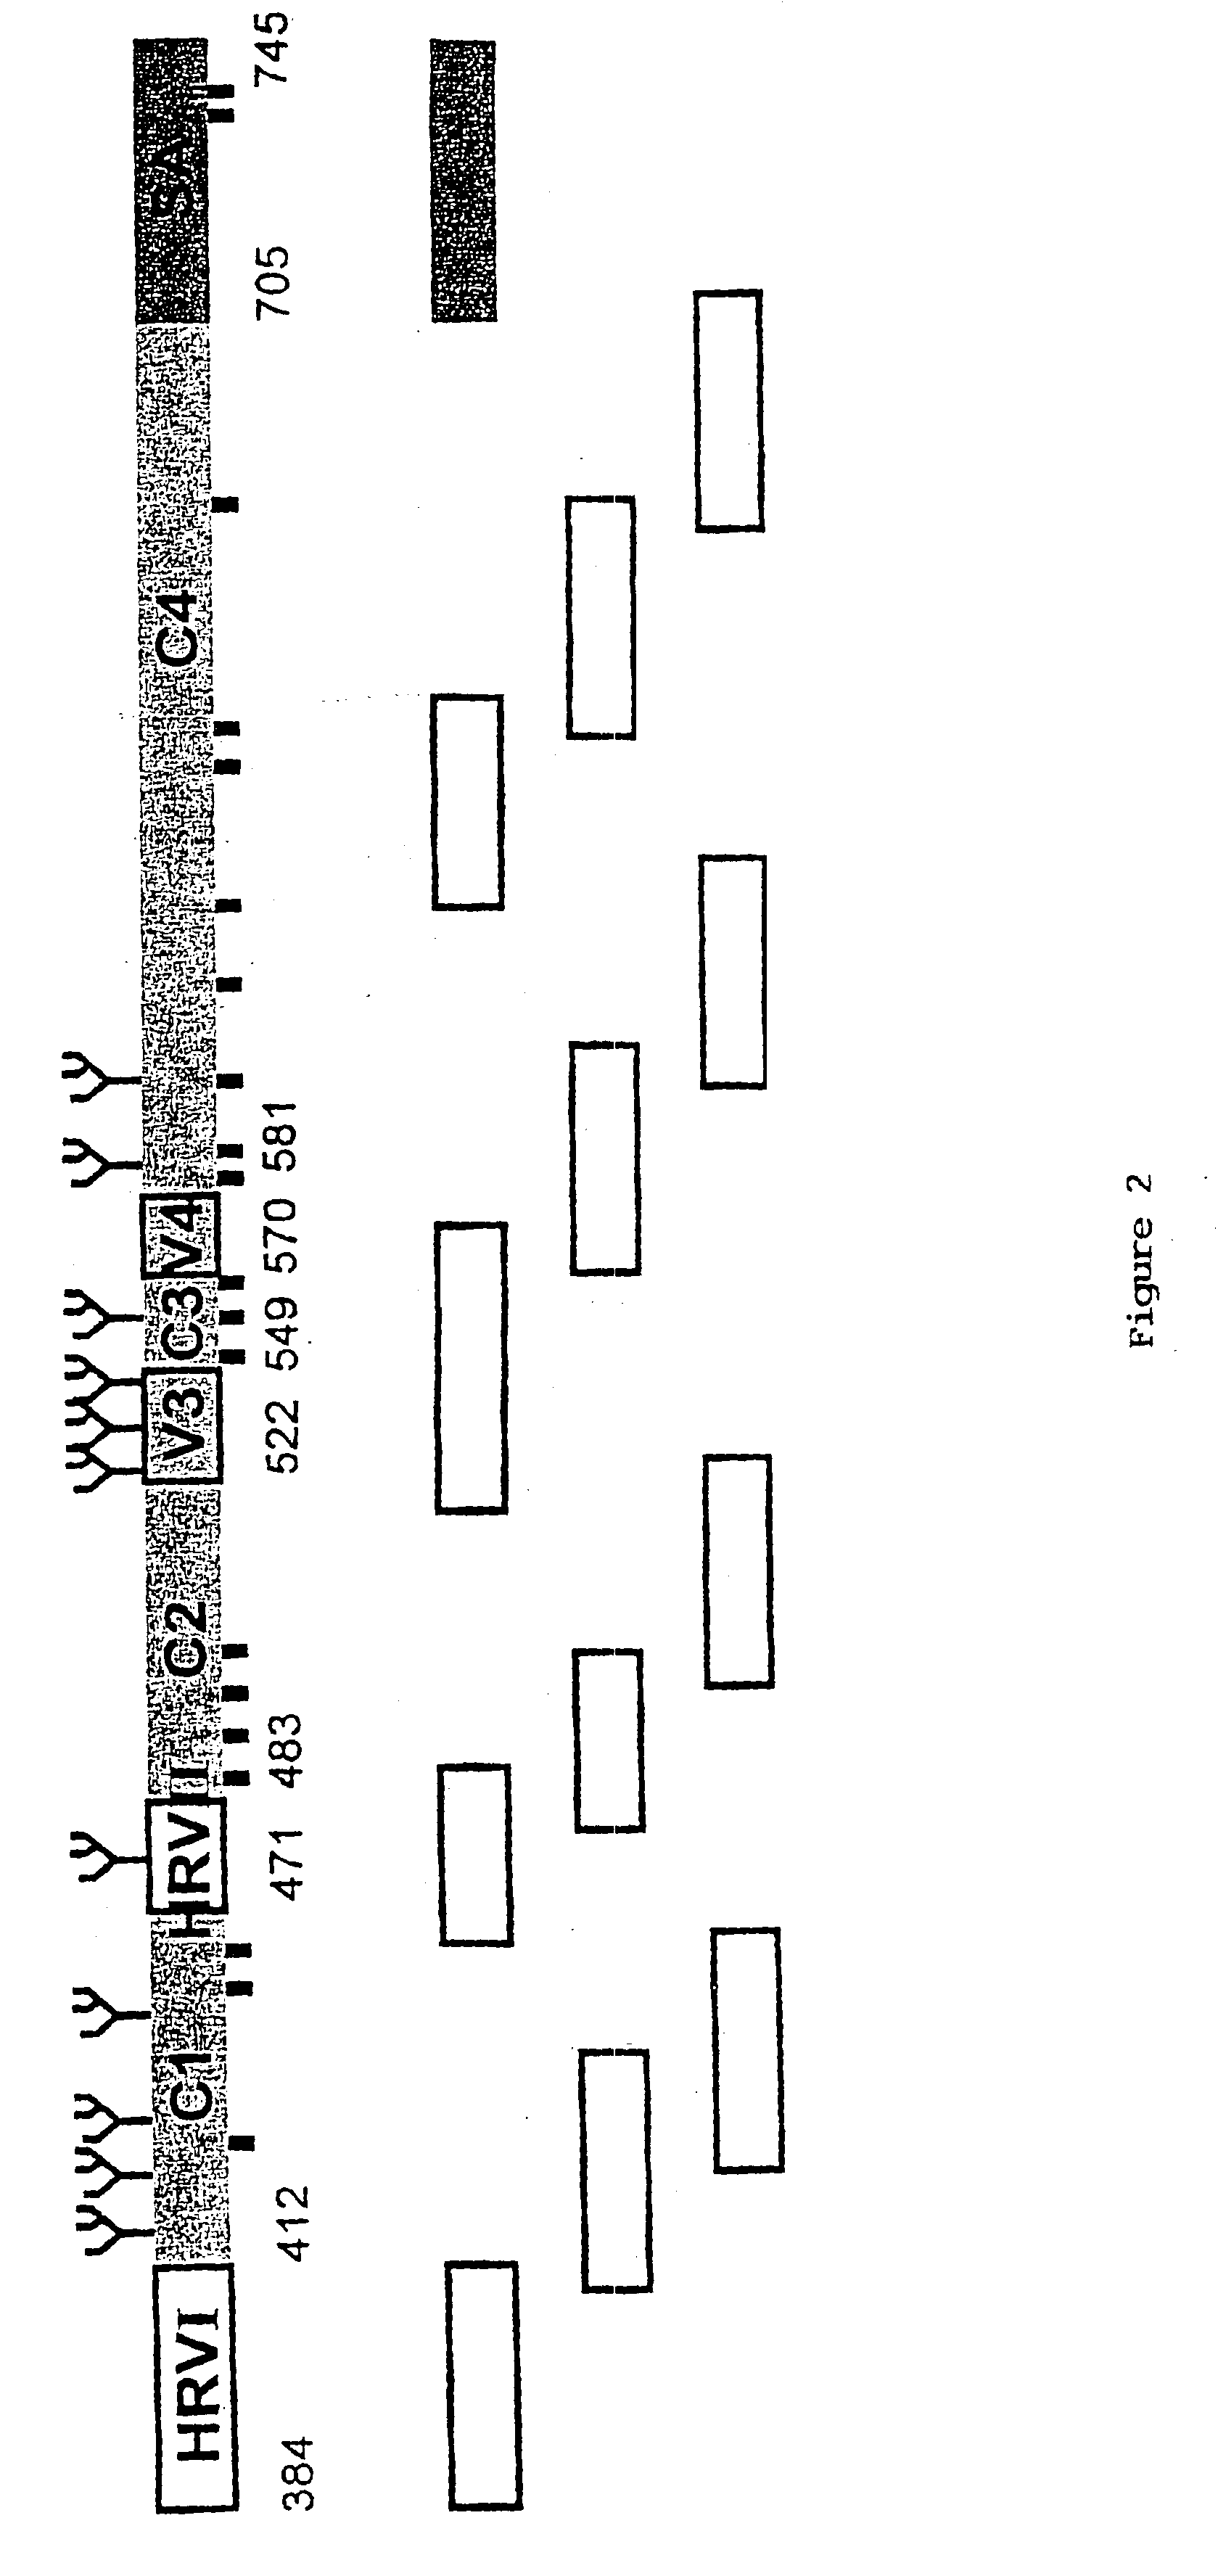 Multi-mer peptides derived from hepatitis C virus envelope proteins for diagnostic use and vaccination purposes